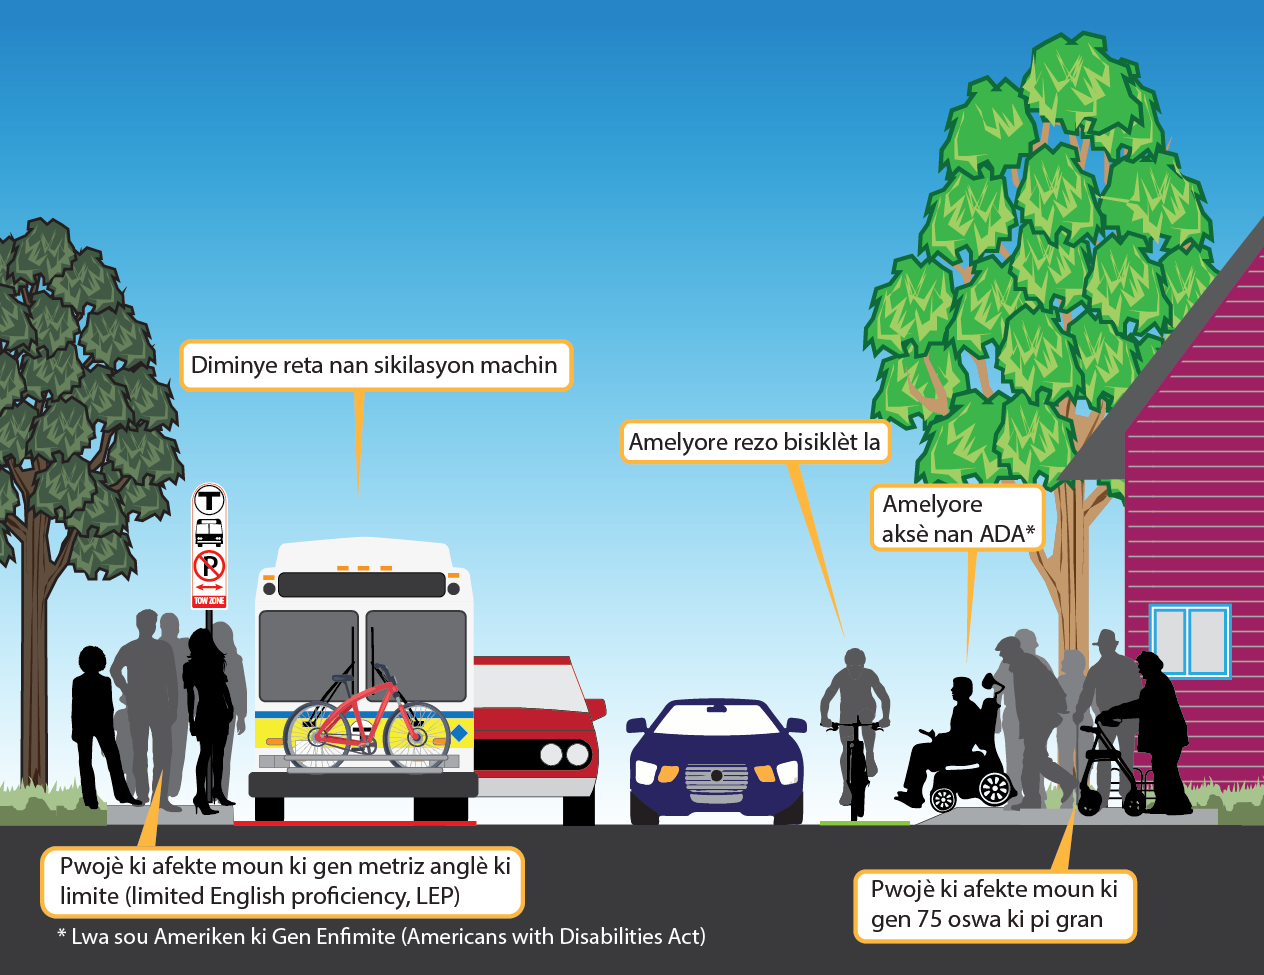 The Transportation Equity image shows a cross section of a street with a bus stop, bus lane, two roadway lanes, a bike lane, and curb extension to improve accessibility. The image shows people waiting at the bus stop, riding in the bike lane, and using the curb extension to cross the street.